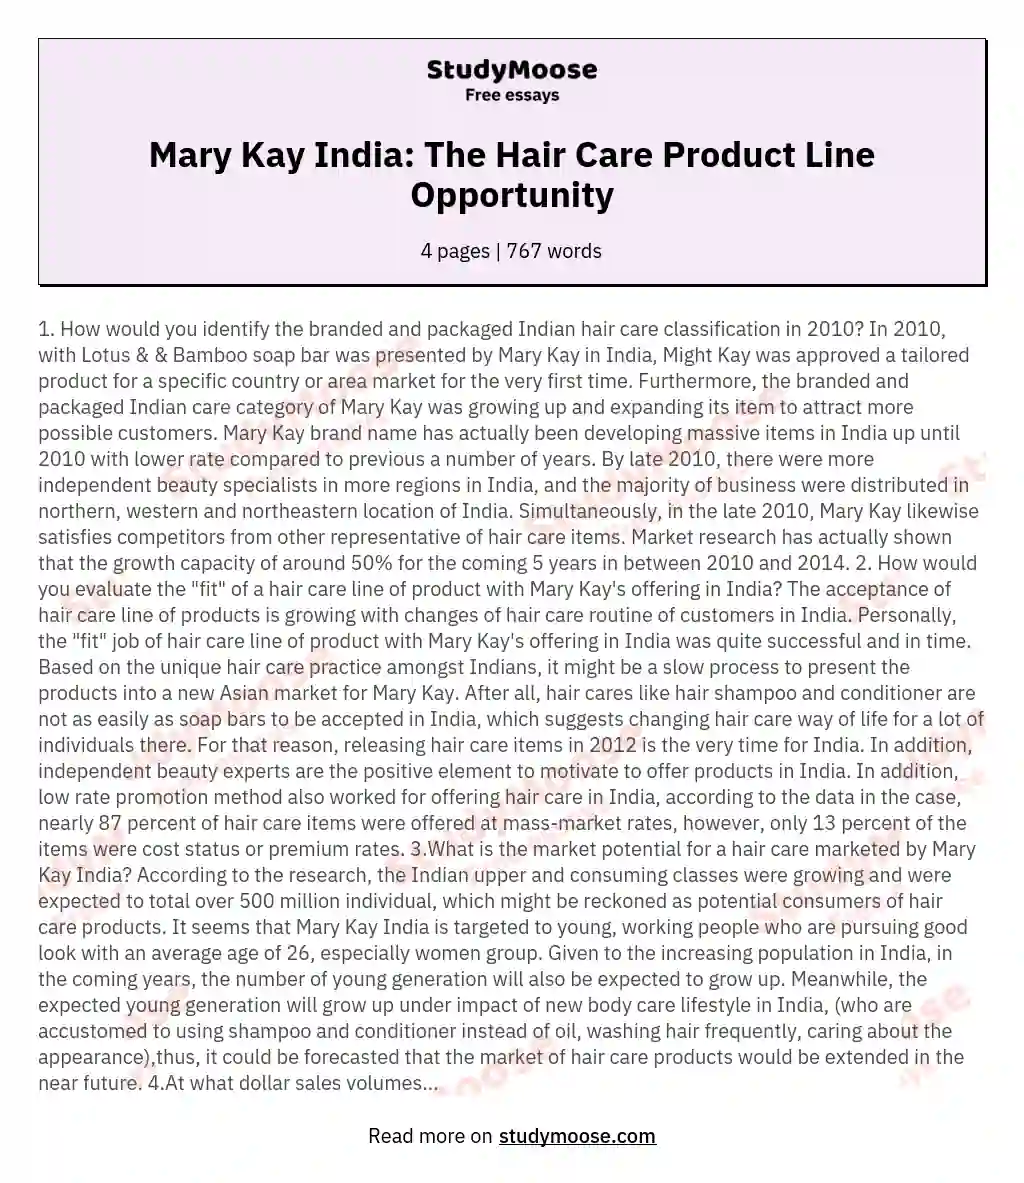 Mary Kay India: The Hair Care Product Line Opportunity